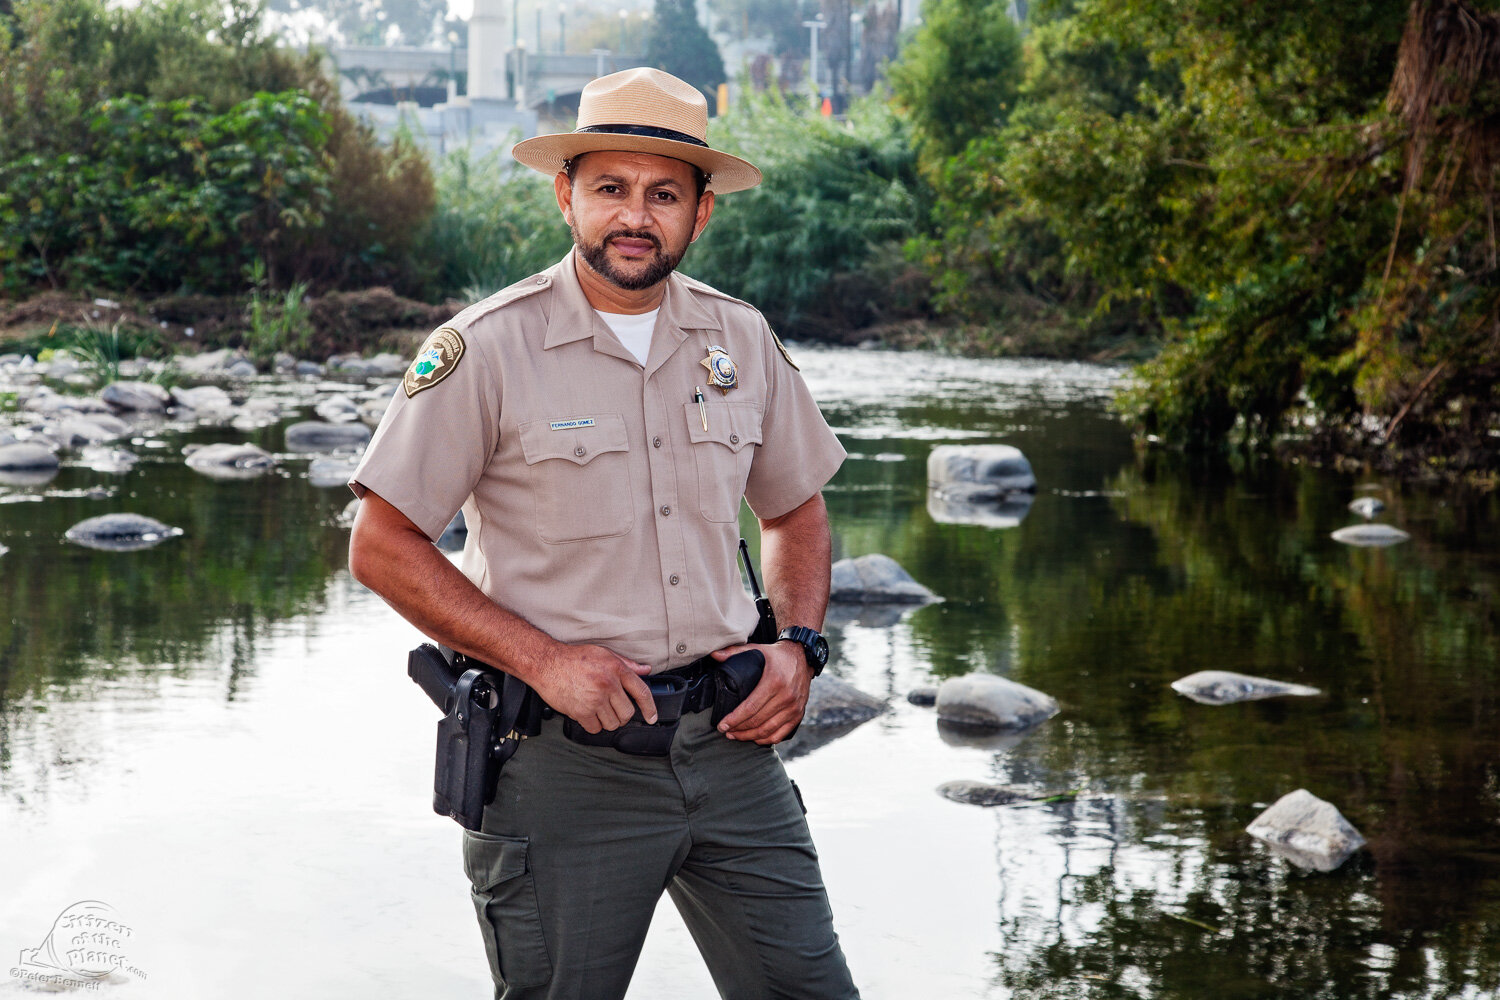  Fernando Gomez, Chief Ranger for the MRCA (Mountains, Recreation and Conservation Authority). 